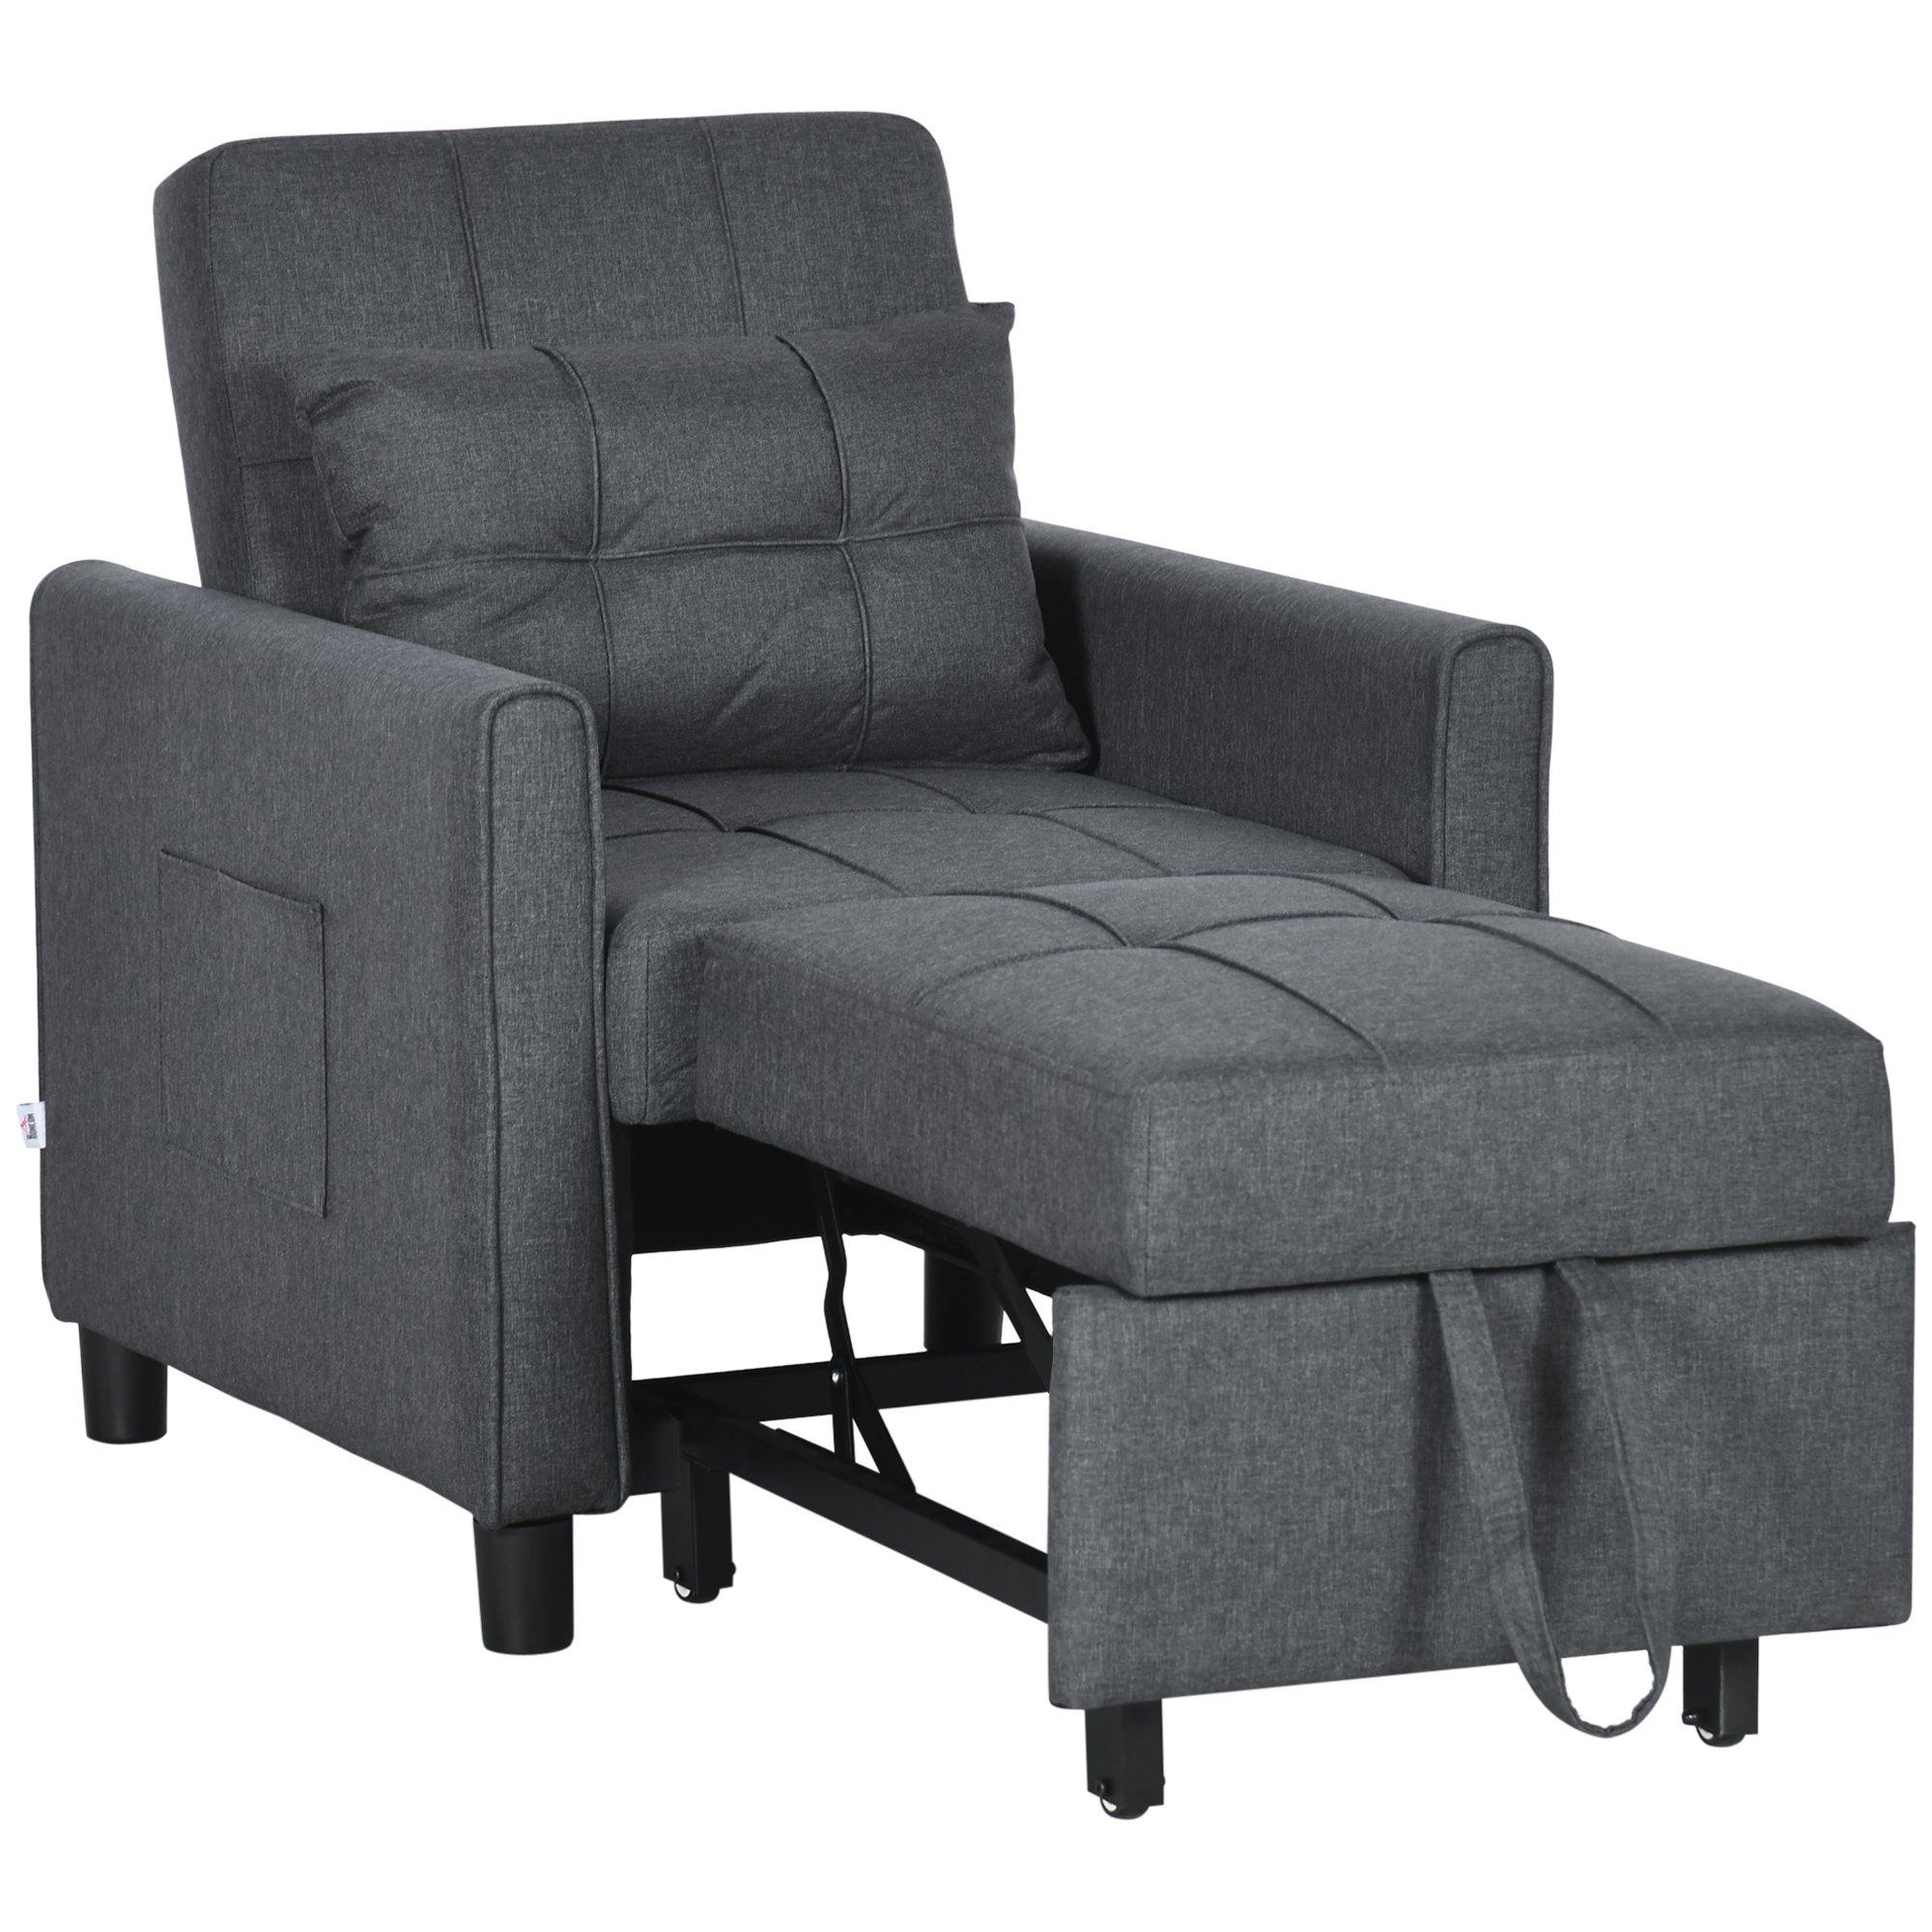 Folding Chair Bed Pull Out Sleeper Chair with Adjustable Backrest